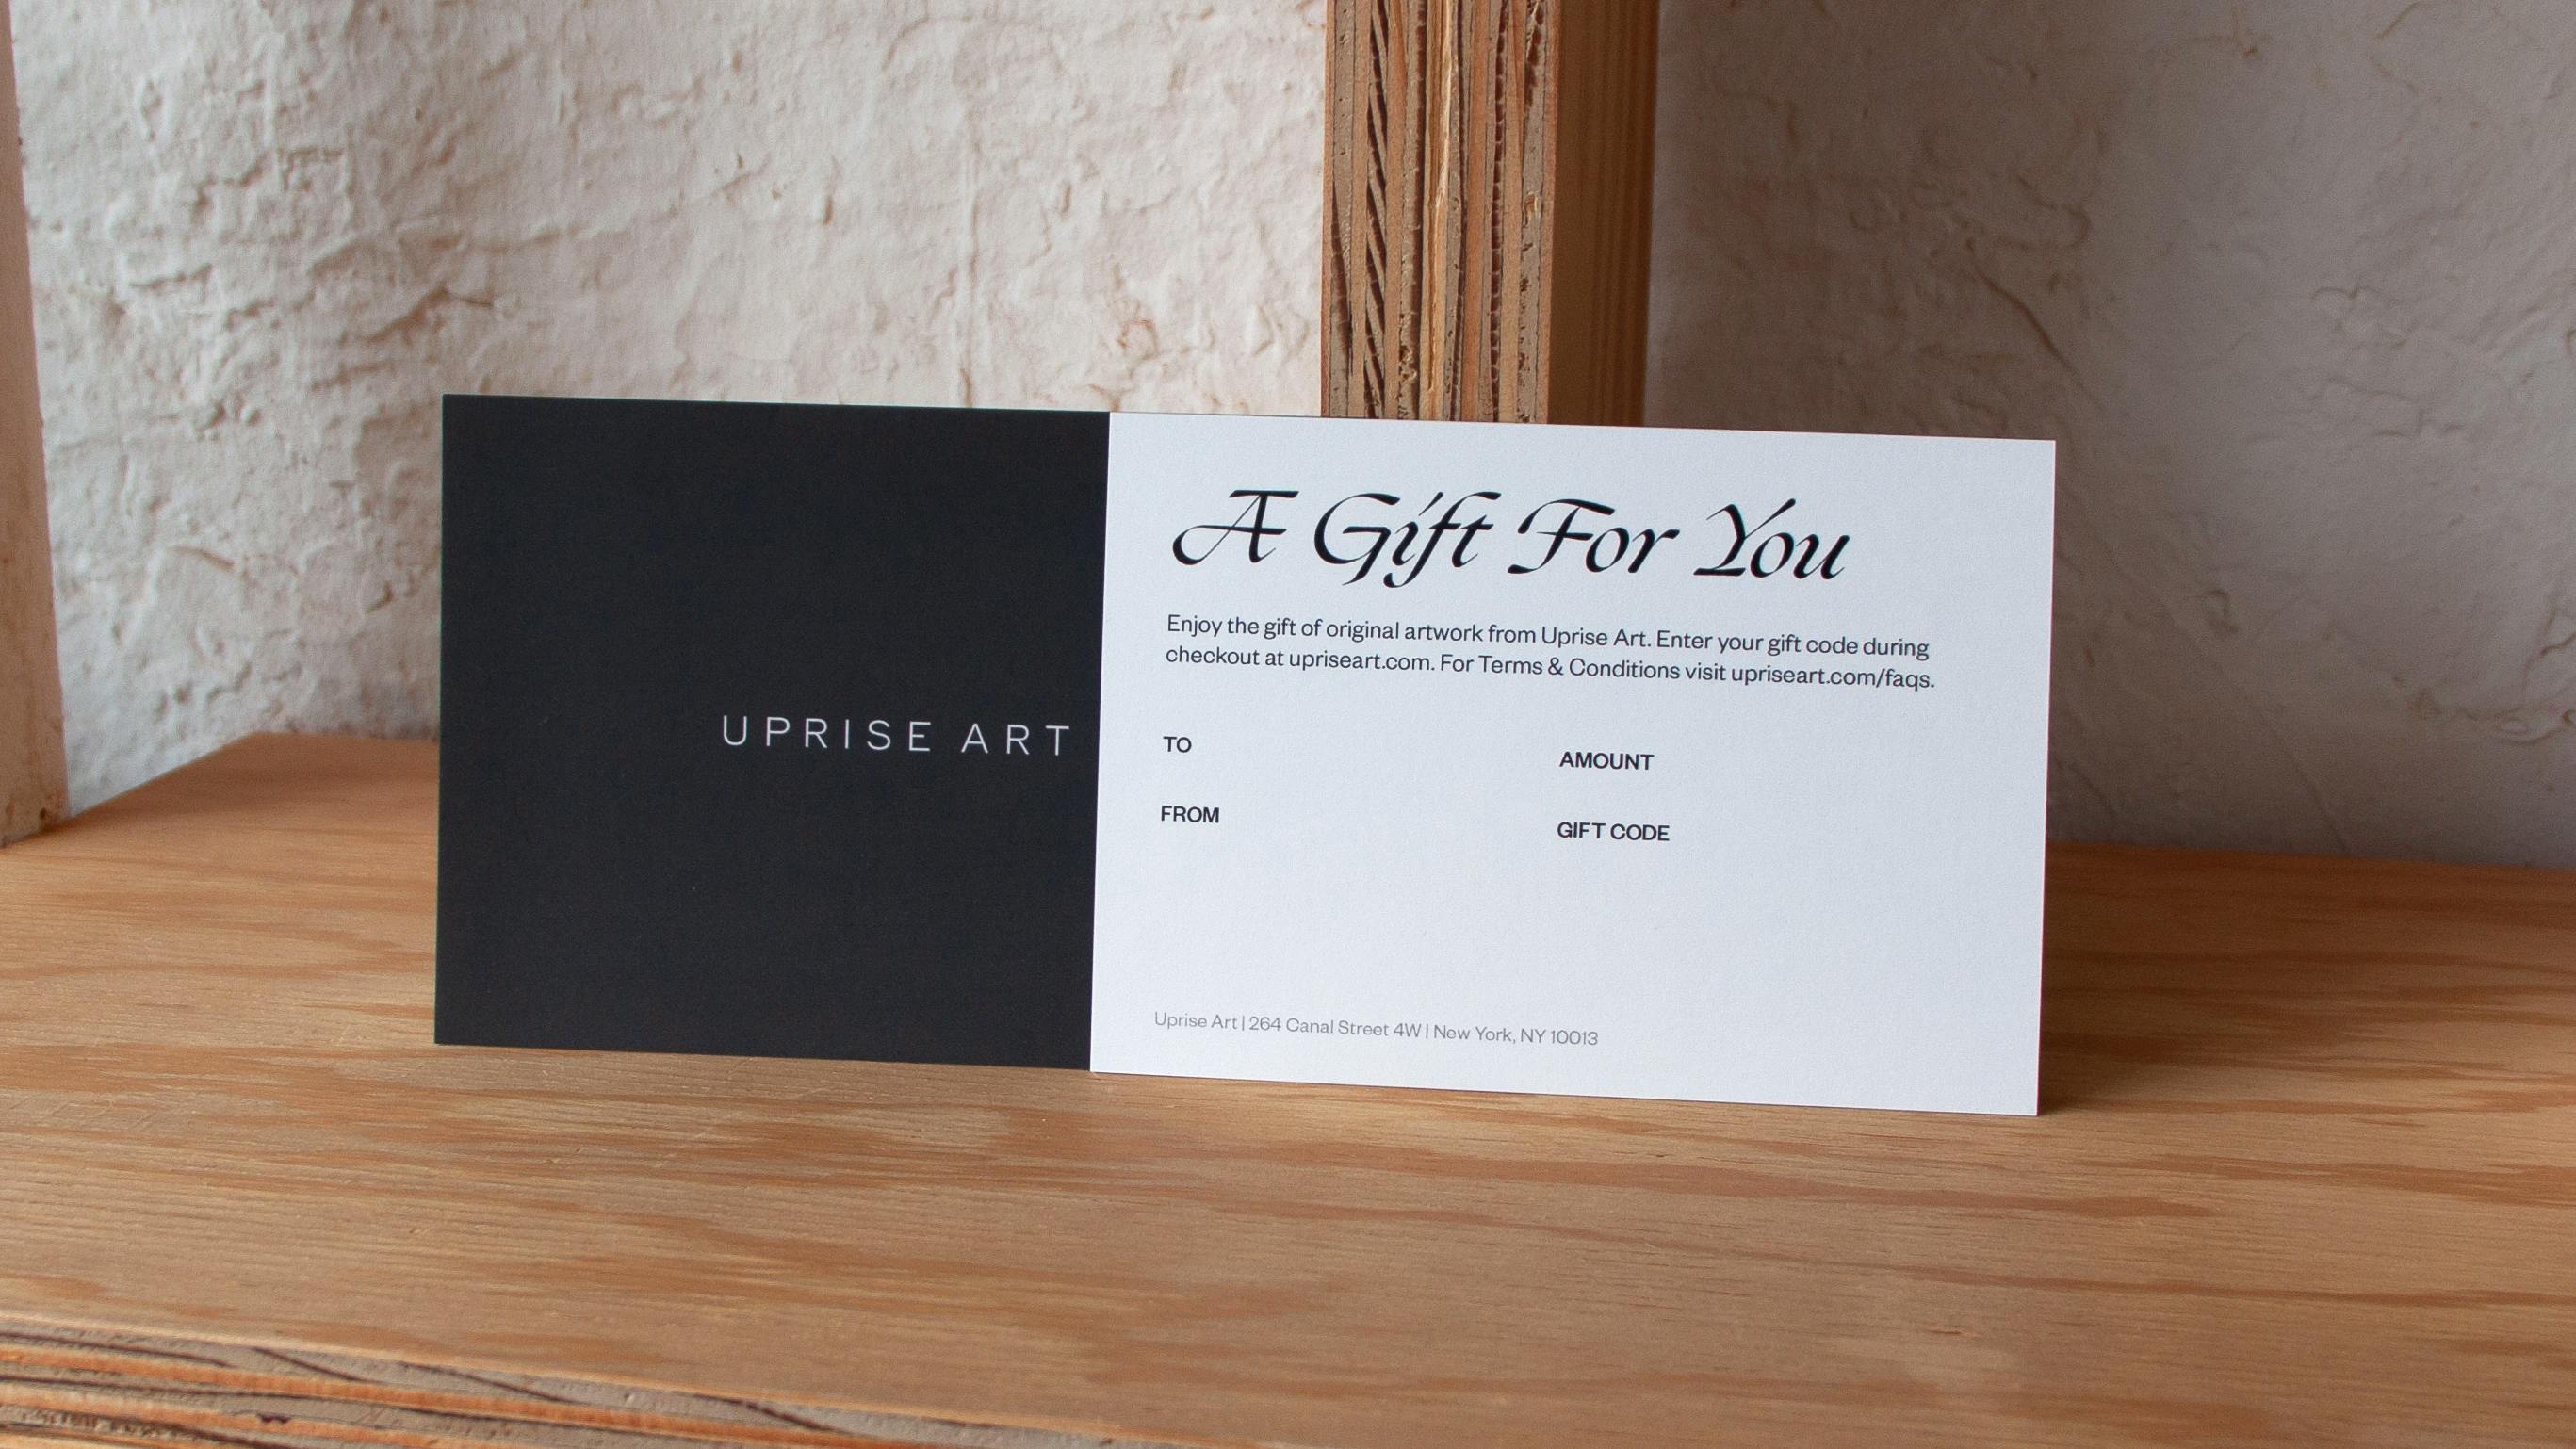 A gray Uprise Art gift card with text that says "A Gift For You" displayed on a wooden bookshelf at the Uprise Art gallery.